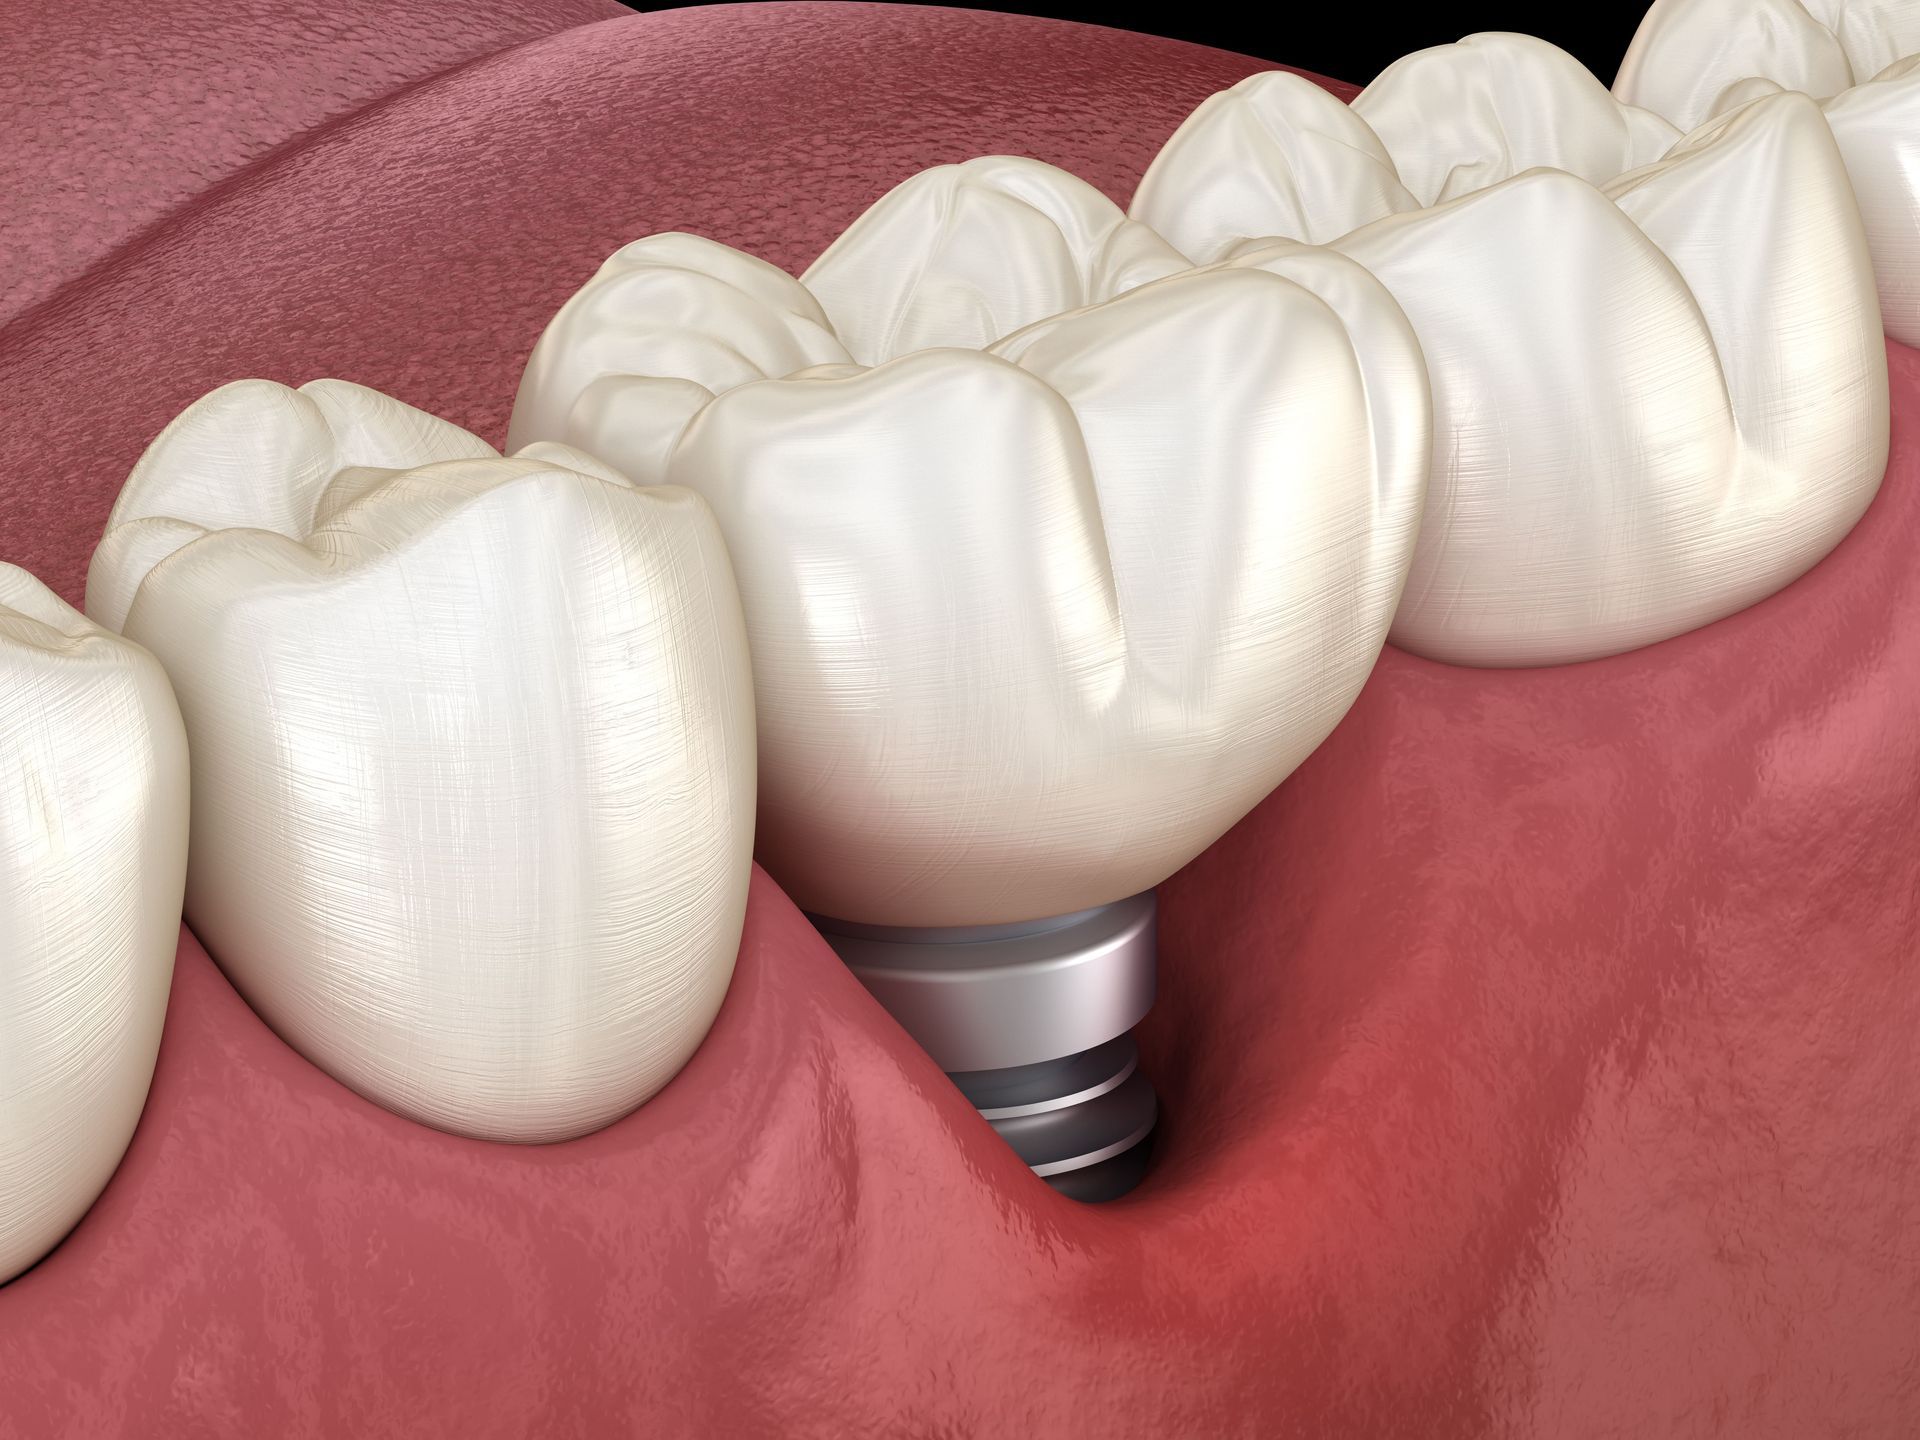 A computer generated image showing a dental implant in the gum